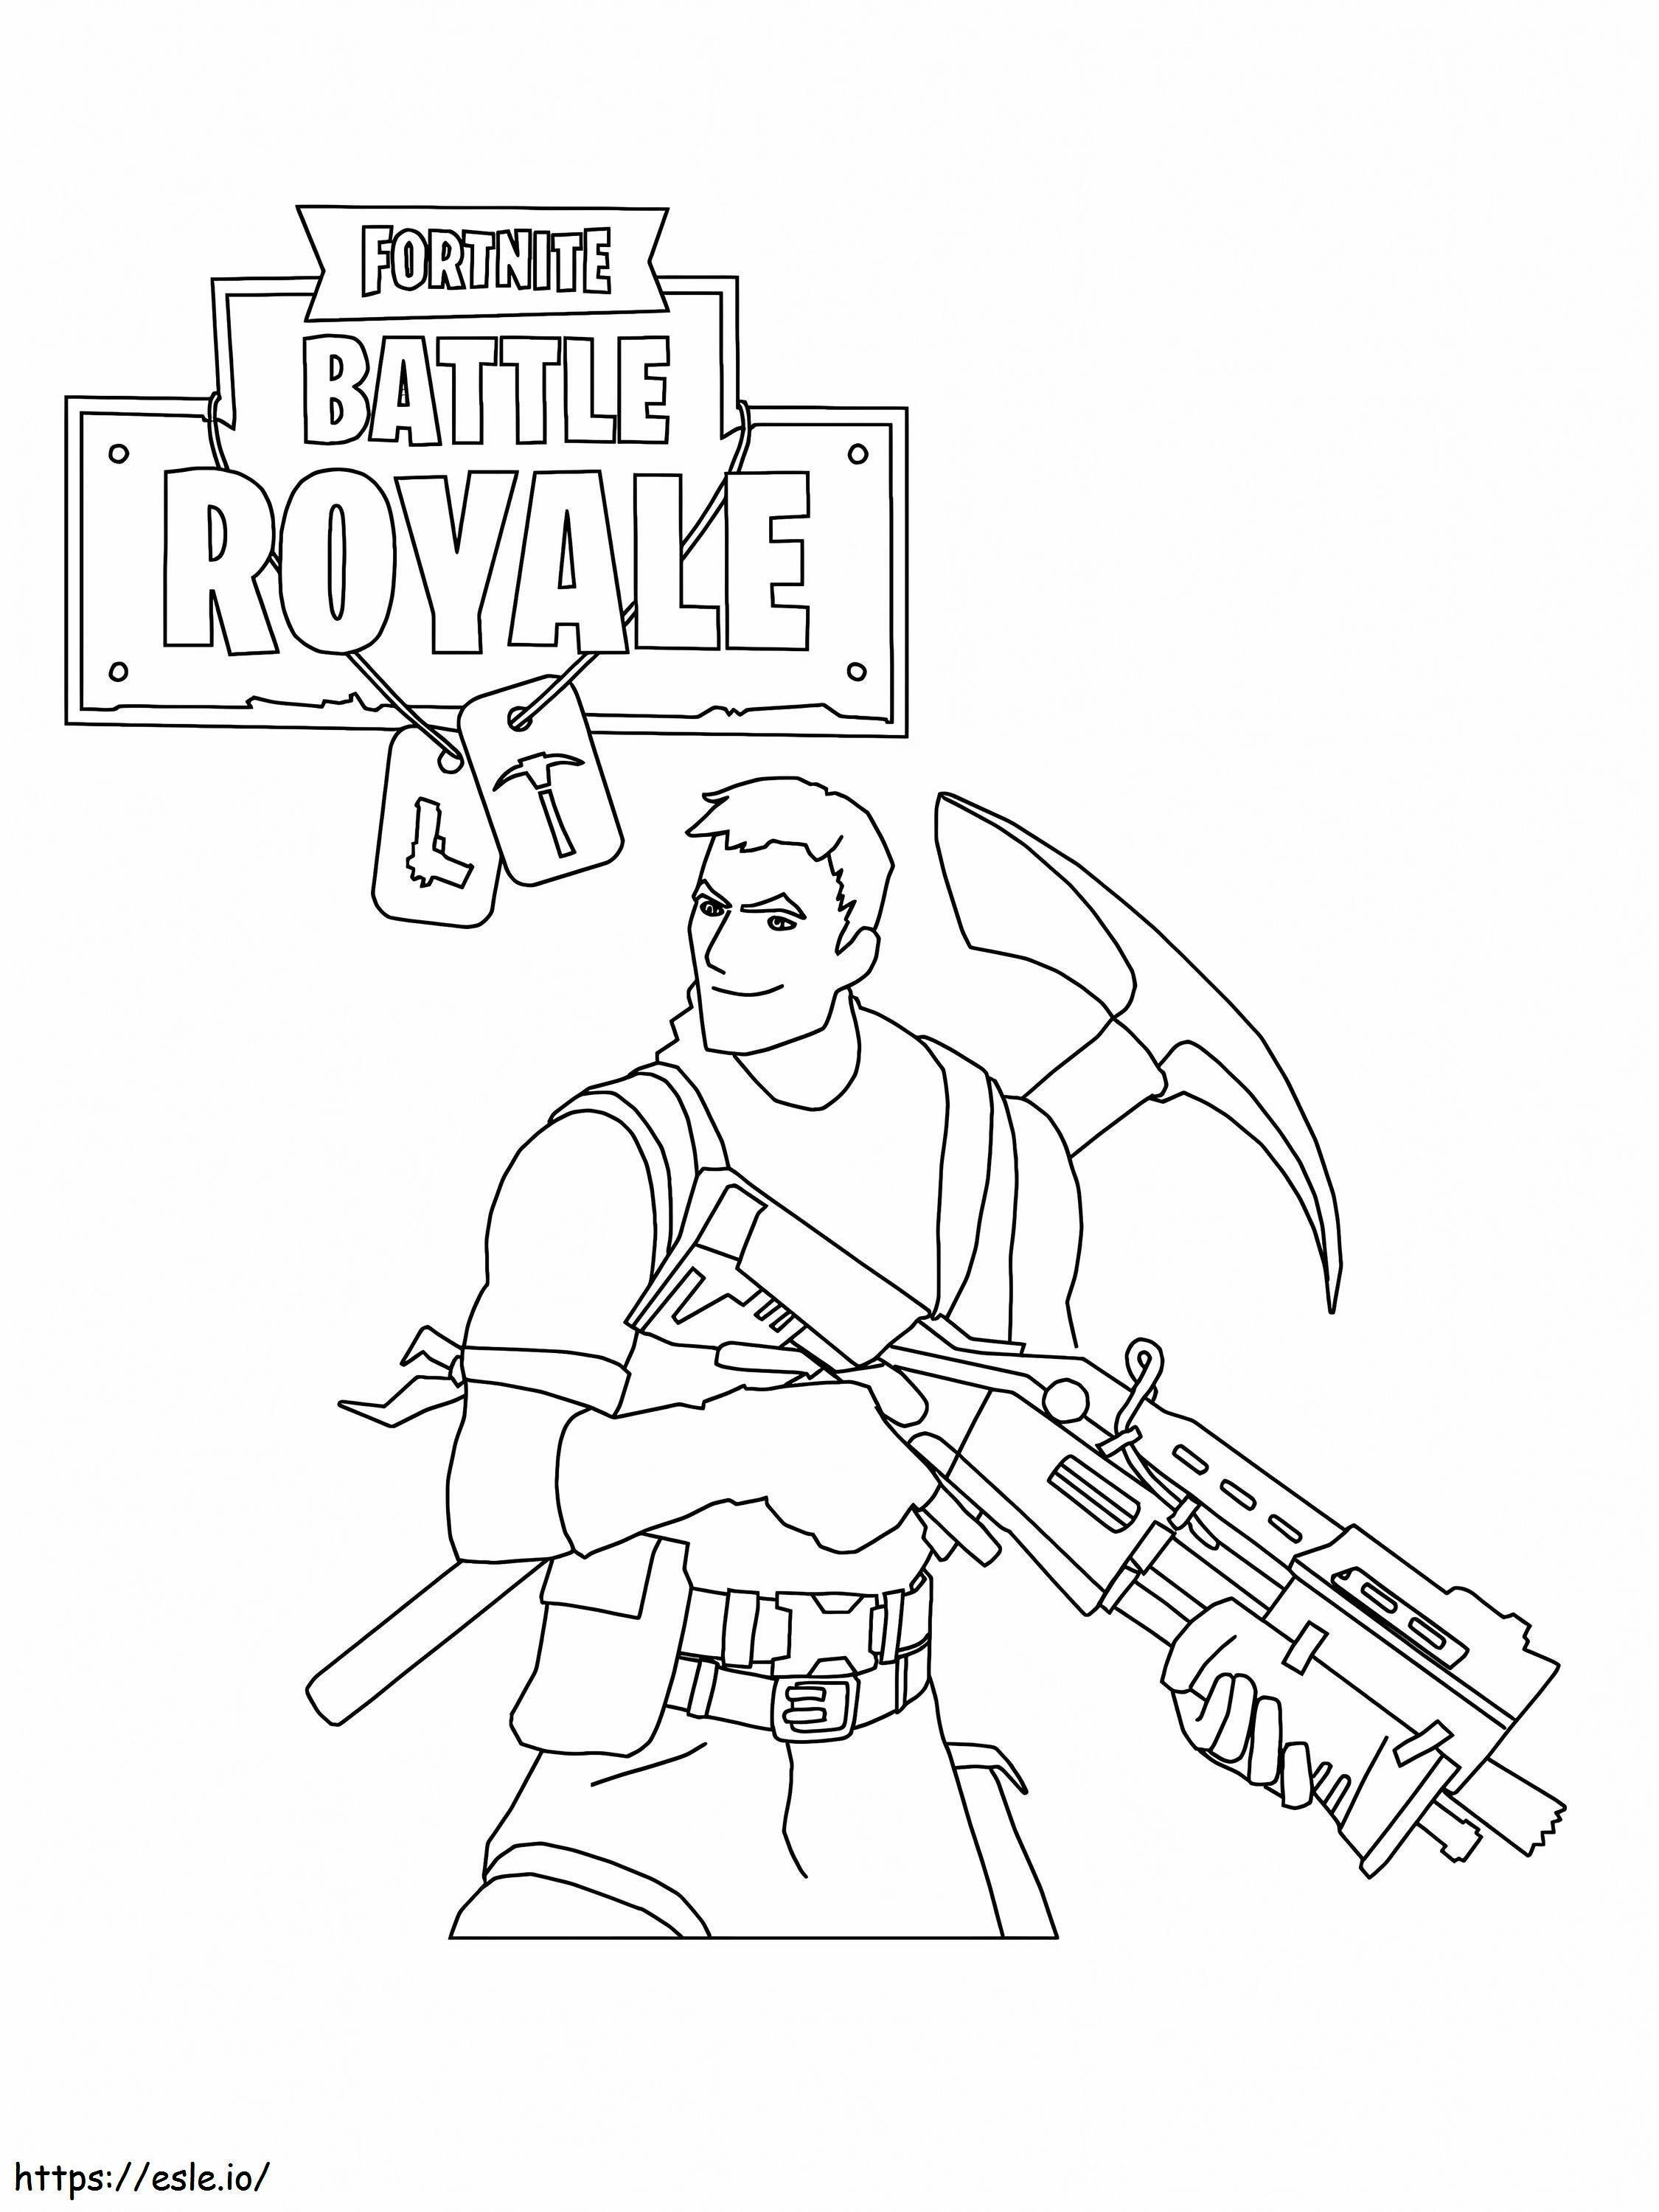 1529114444 Fortnite 009 coloring page